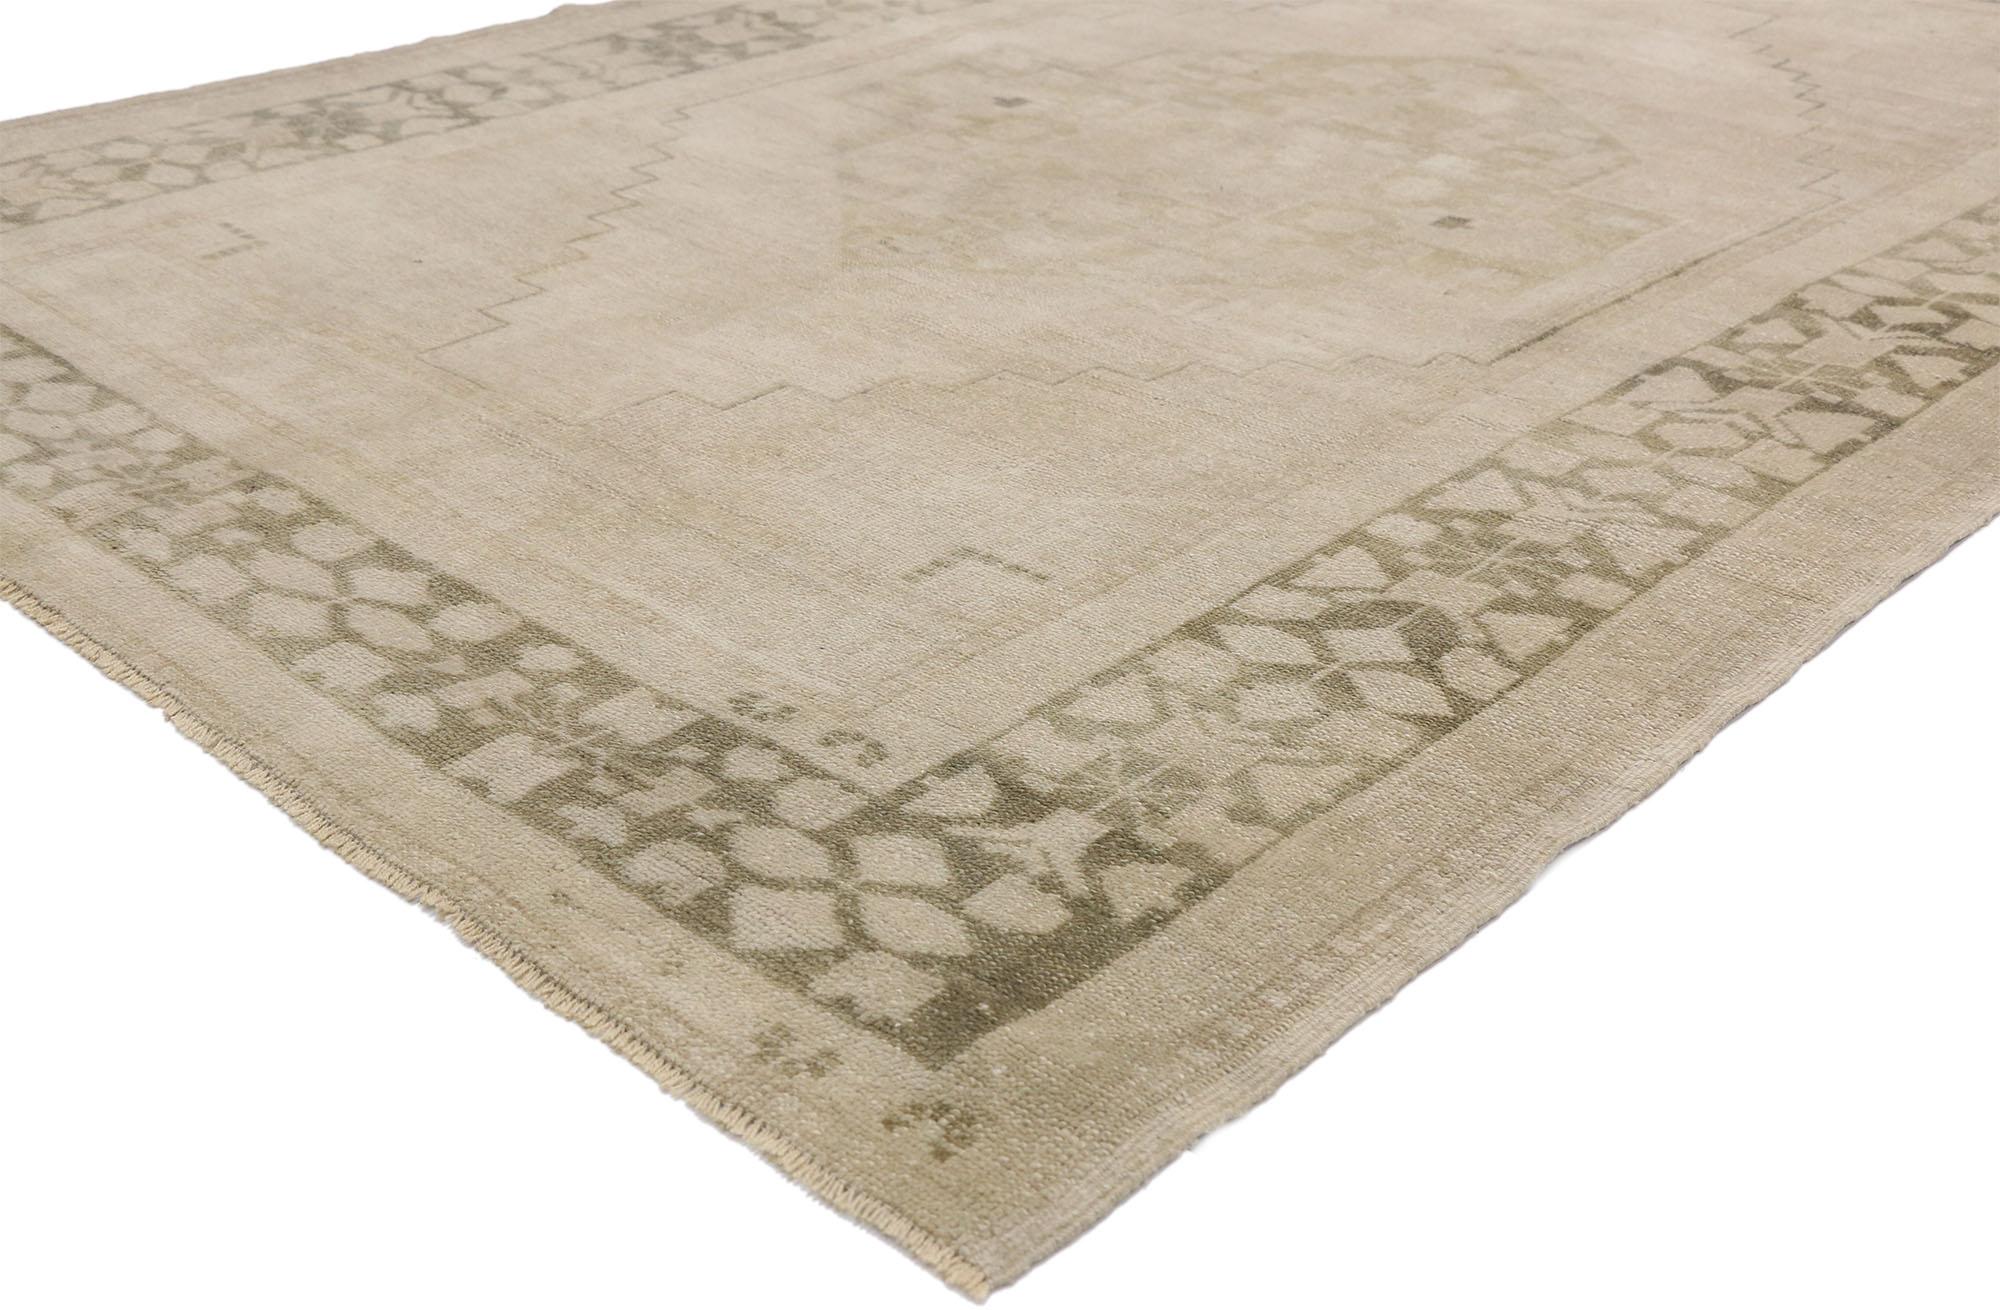 52483, vintage Turkish Oushak rug with Mission style and faded, neutral colors. This hand knotted wool vintage Turkish Oushak rug with Mission style welcomes guests with warmth and sophistication. This gorgeous Vintage Turkish Oushak Rug displays a